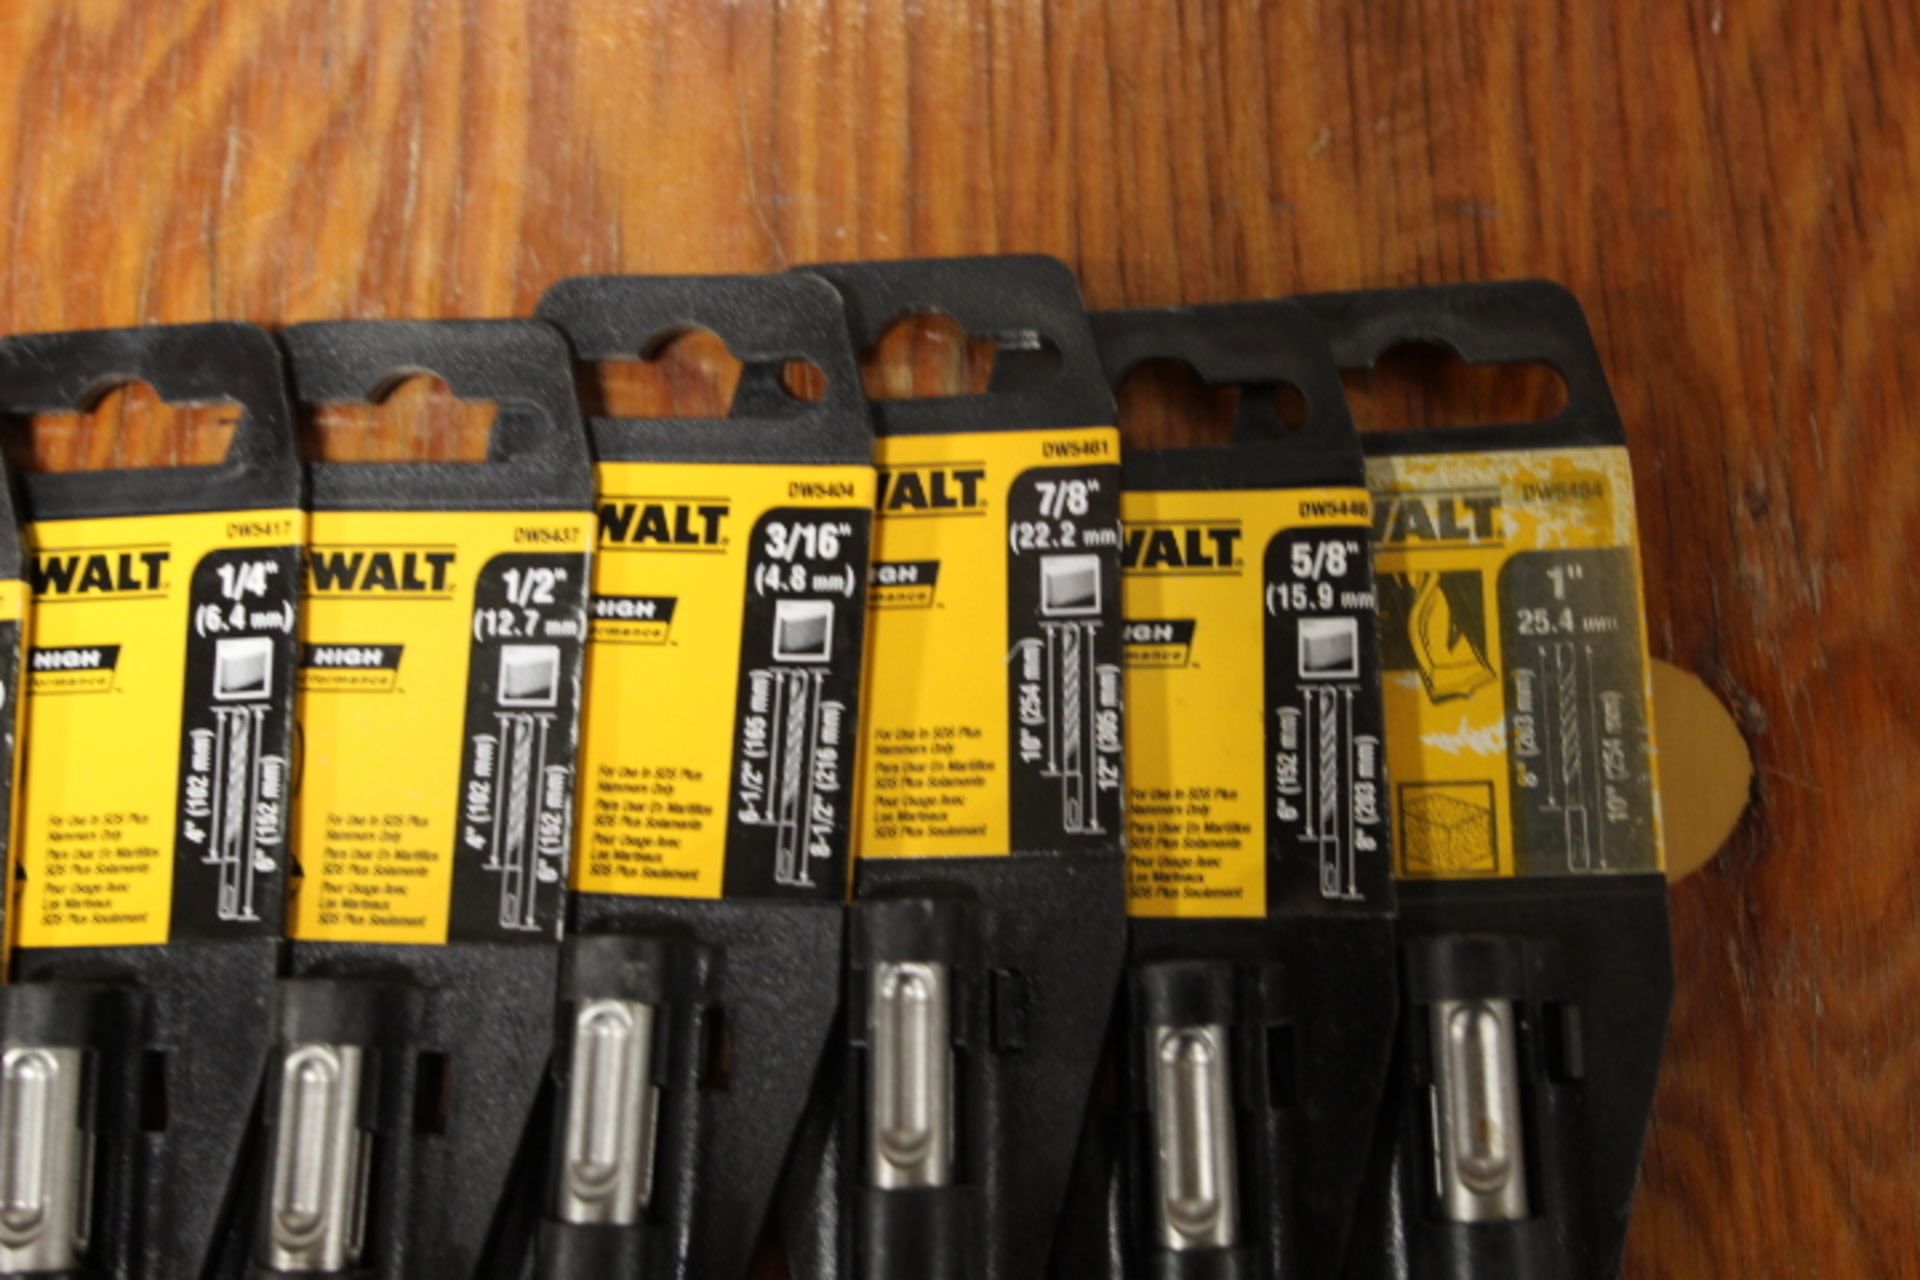 LOT OF 11 NEW DEWALT,SDS & MASONARY DRILL BITS VARIOUS SIZES AND LENGHTS - Image 3 of 3